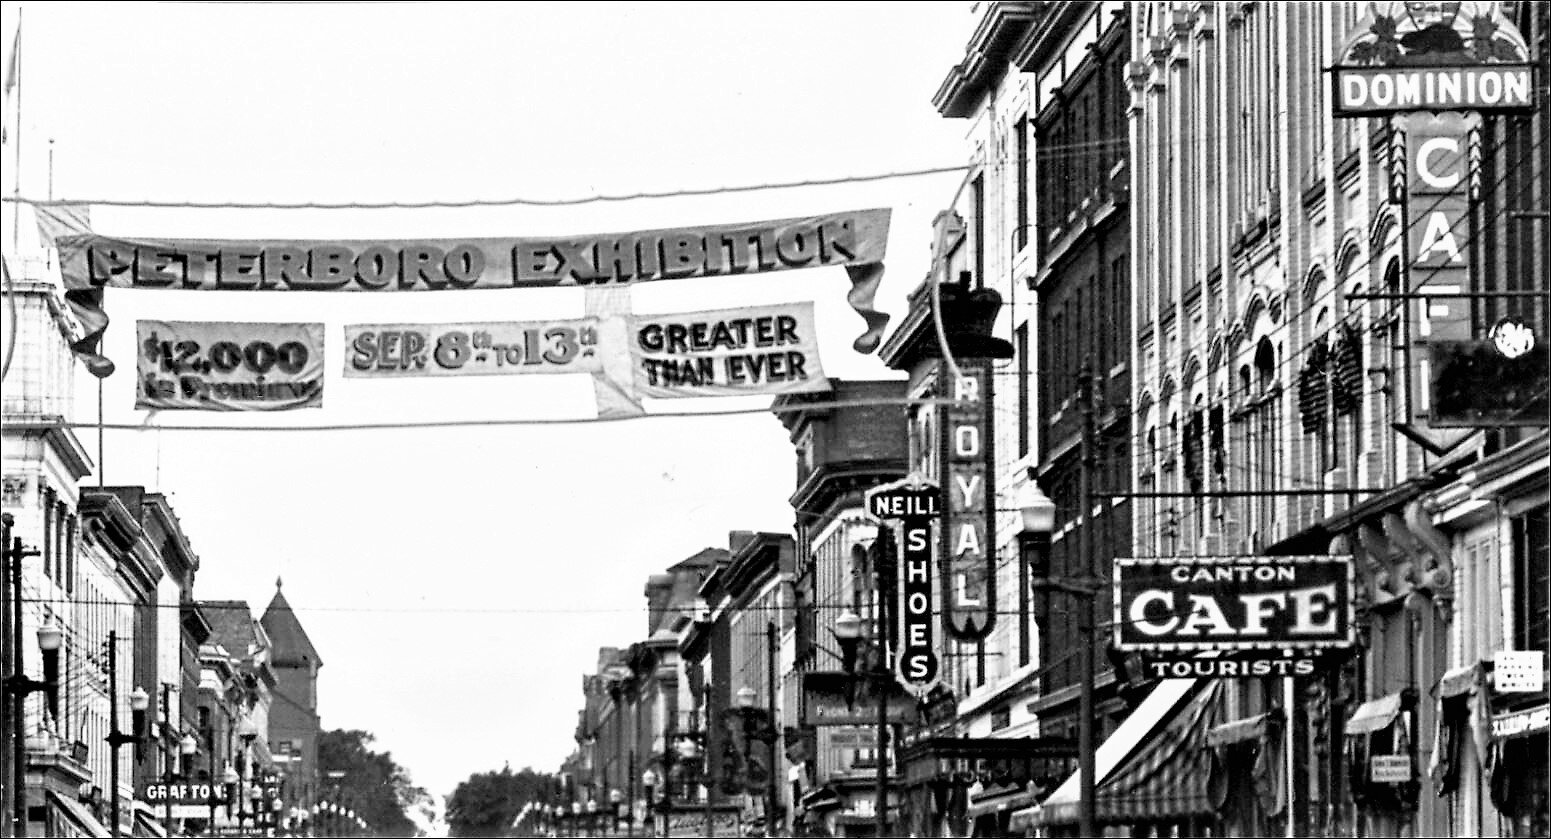 Royal Theatre, Part 2, 1921–25 — A Peterborough Movie-Going History